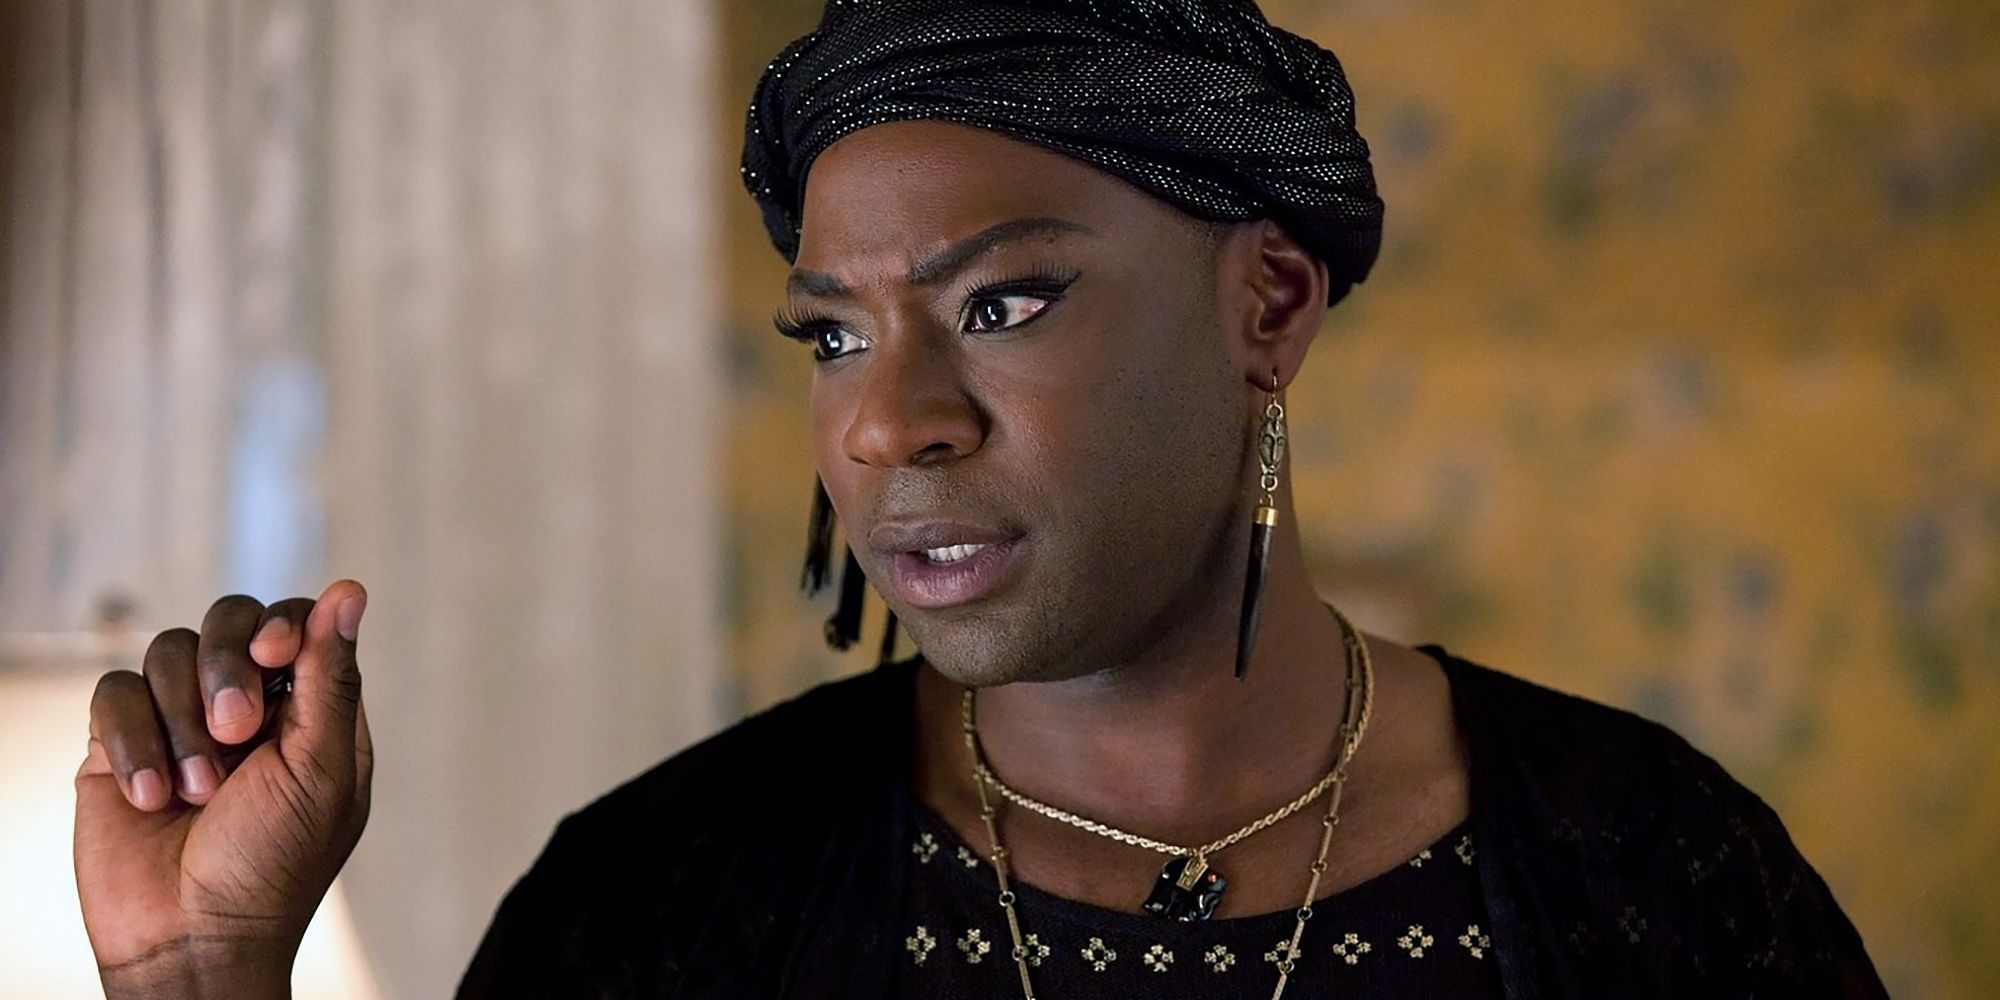 'True Blood's creator Alan Ball decided not to follow the source material and make Lafayette Reynolds (Nelsan Ellis) a regular character